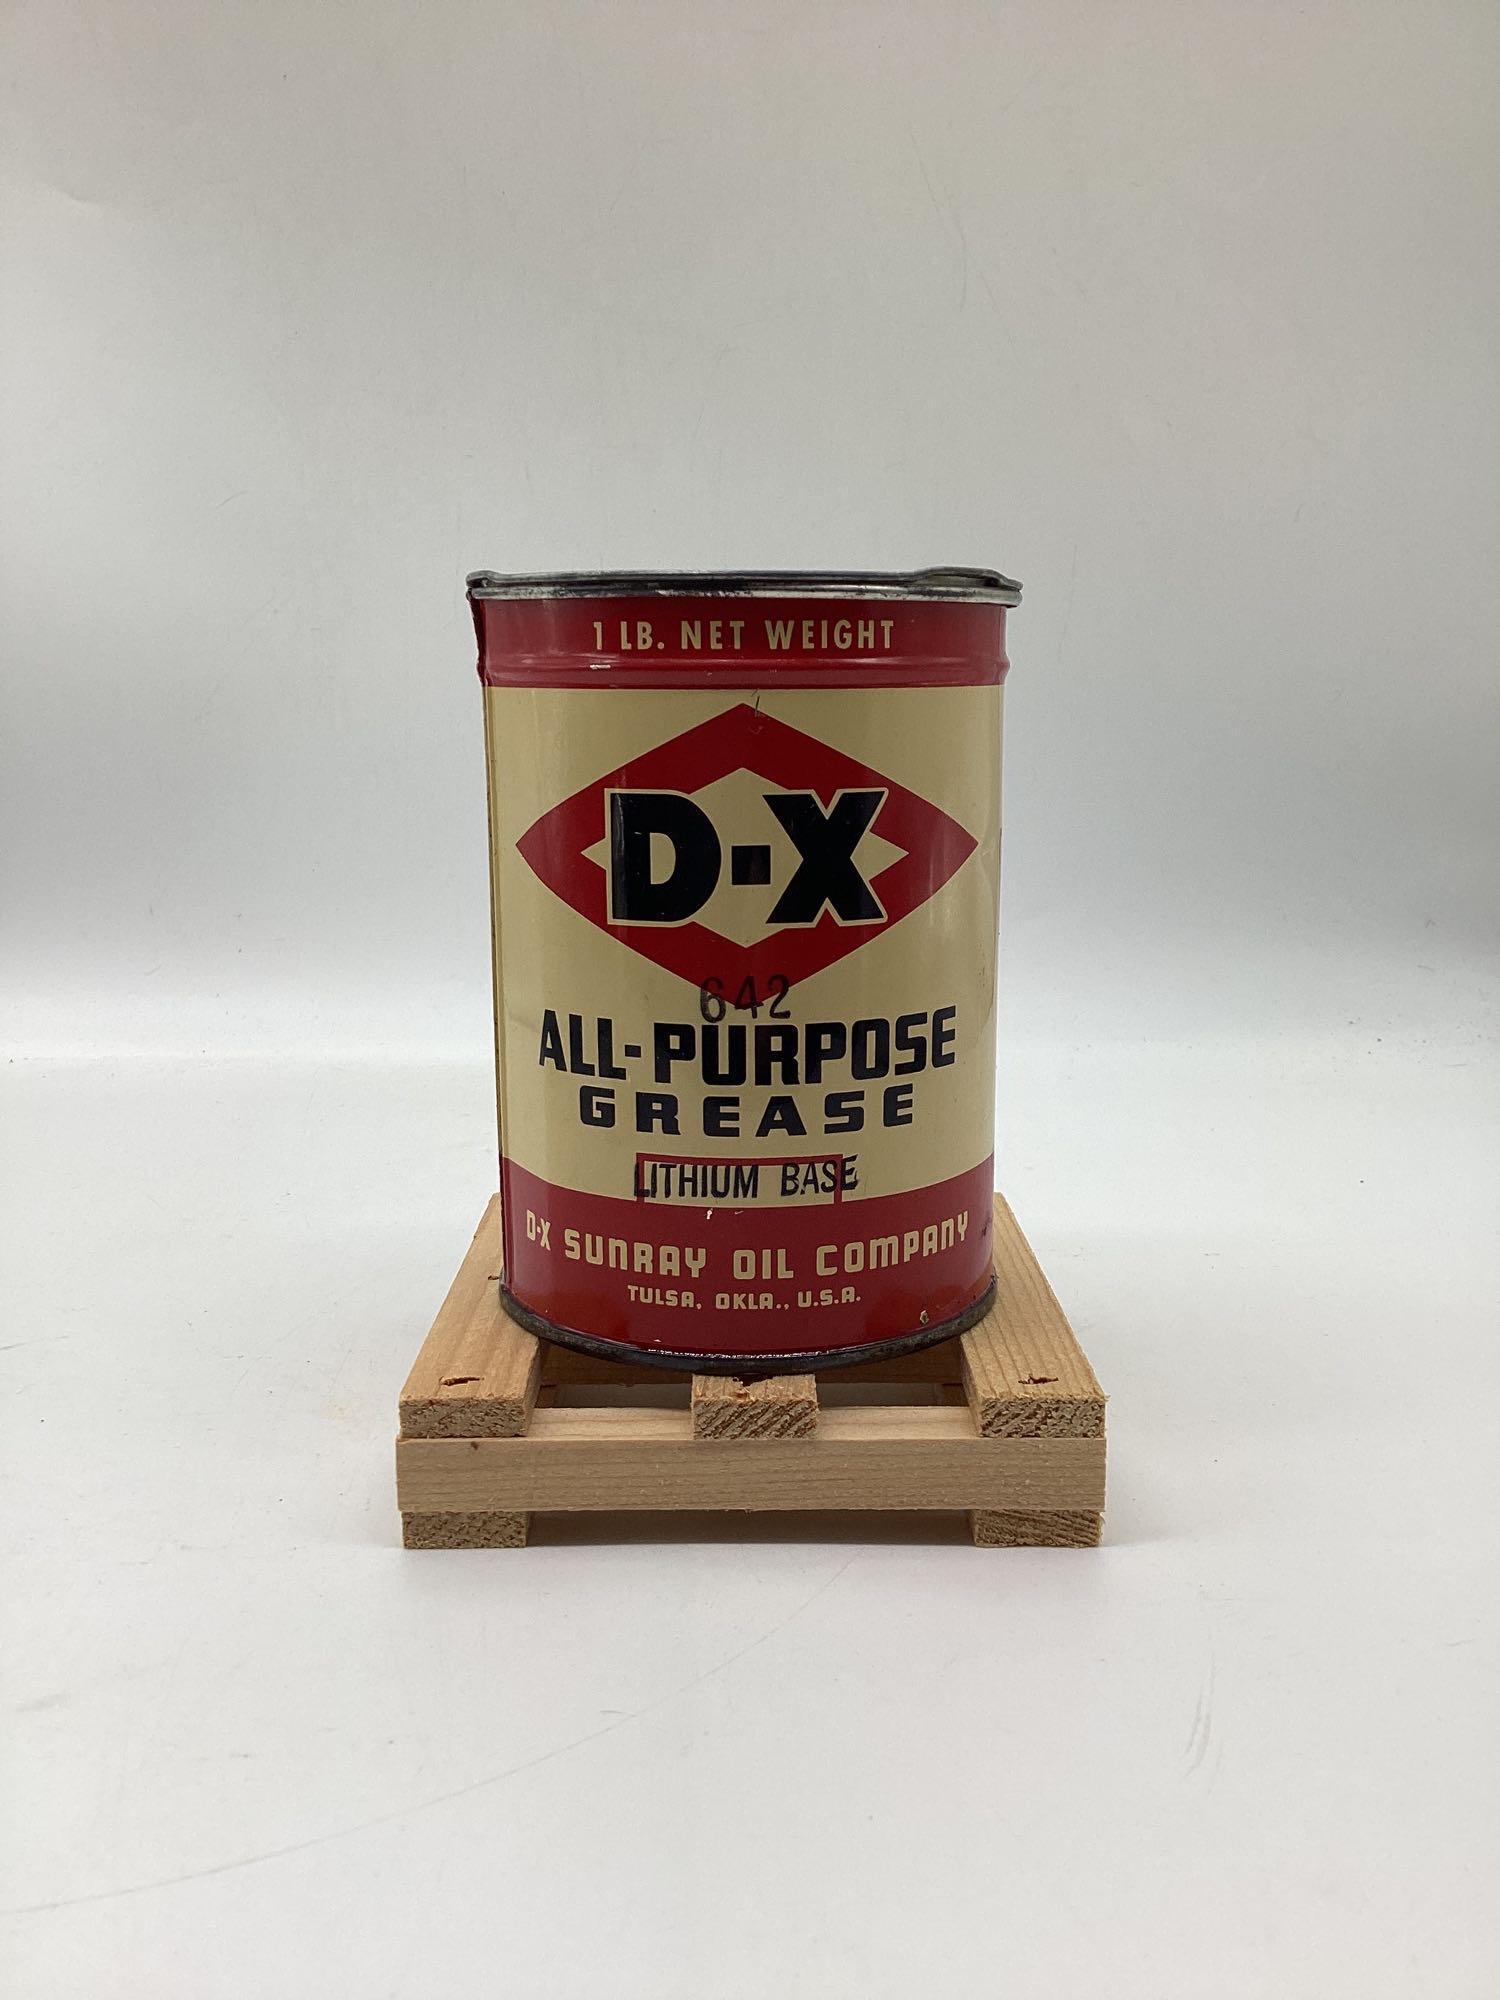 Texaco Tulsa Salt Bag, Phillips Paperweight and D-X Grease Can